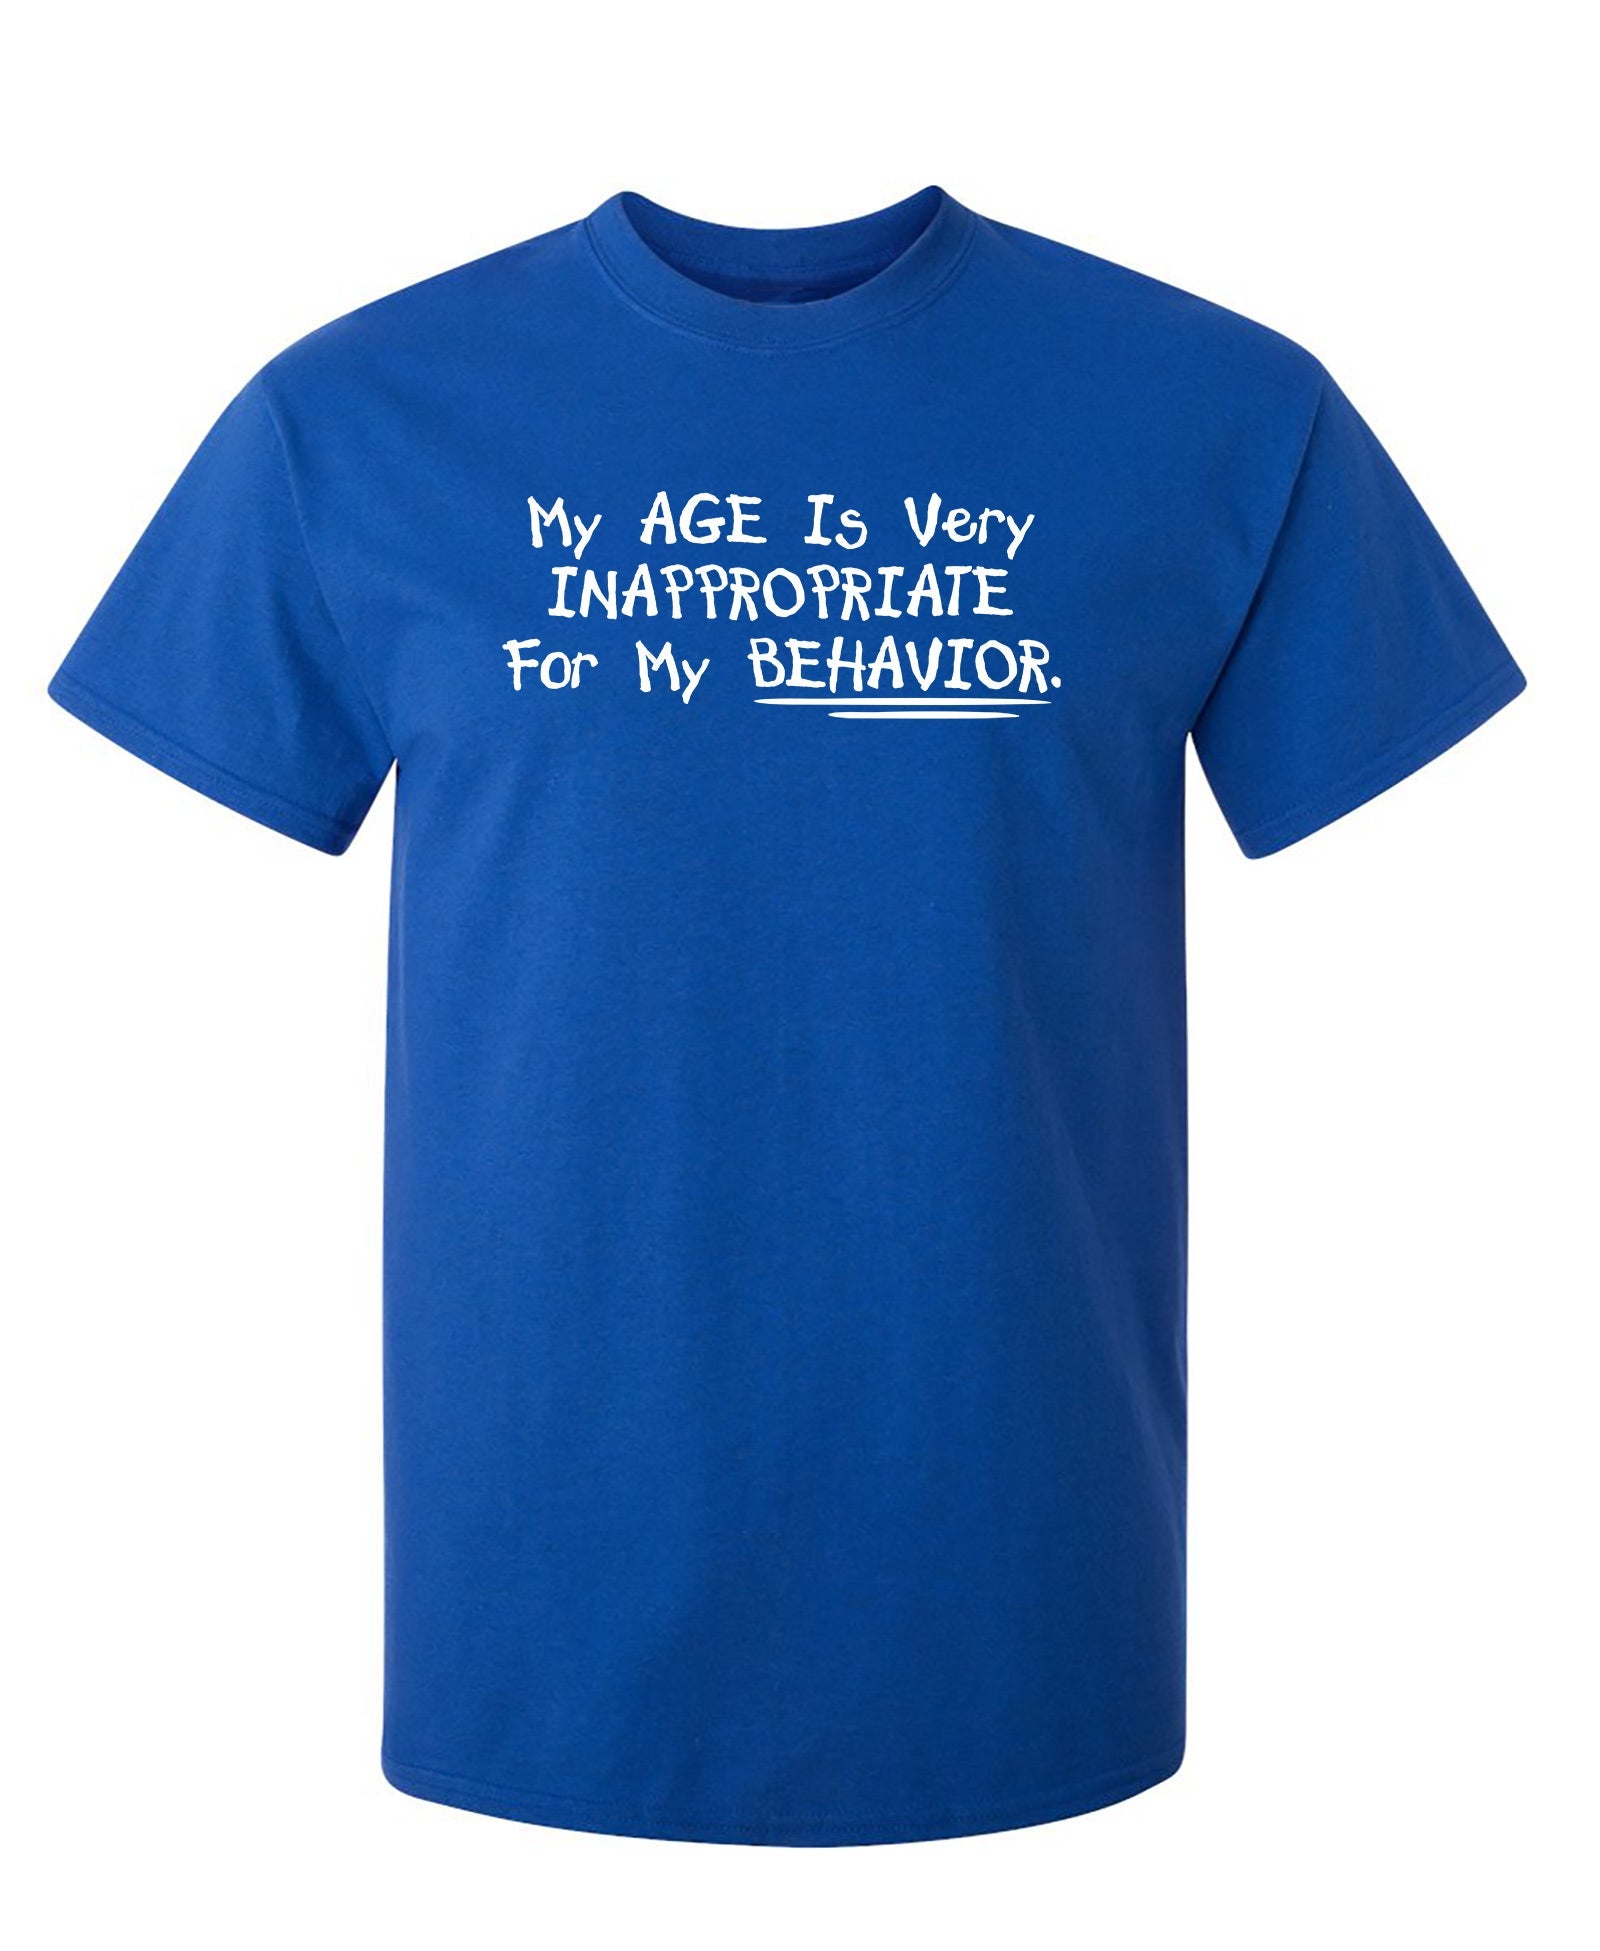 My Age Is Very Inappropriate For My Behavior - Funny T Shirts & Graphic Tees